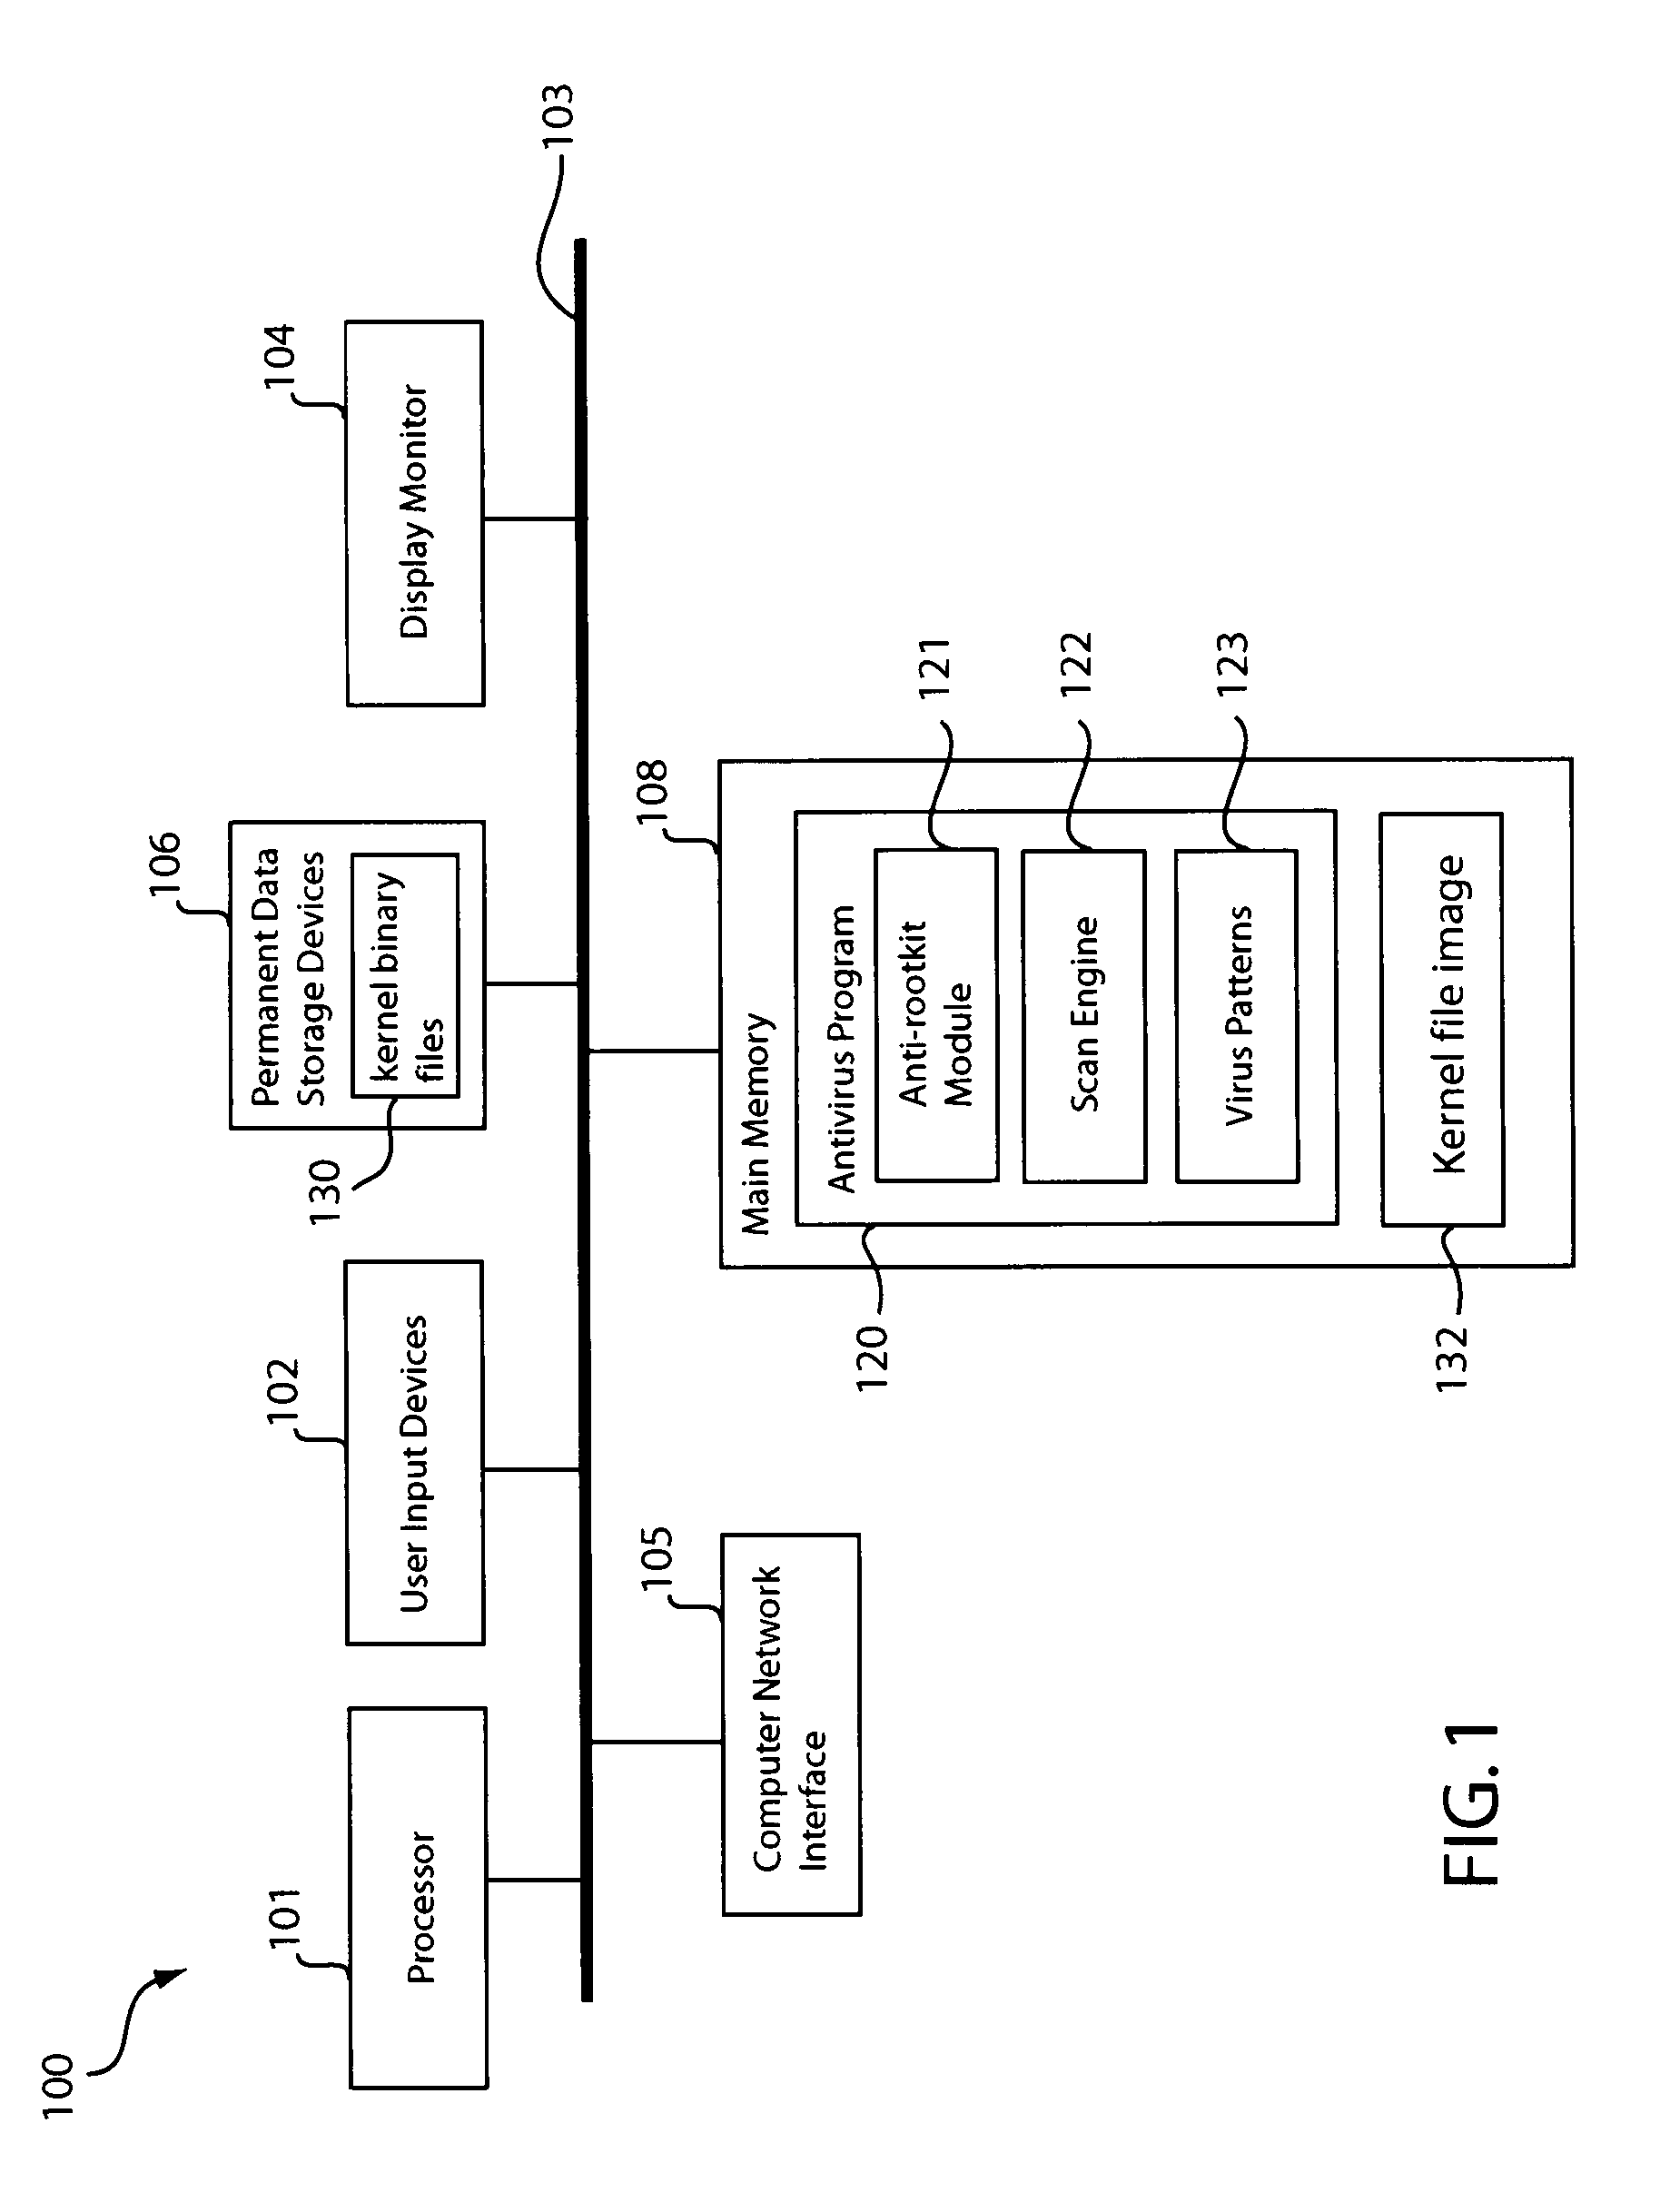 Method and apparatus for detecting and removing kernel rootkits